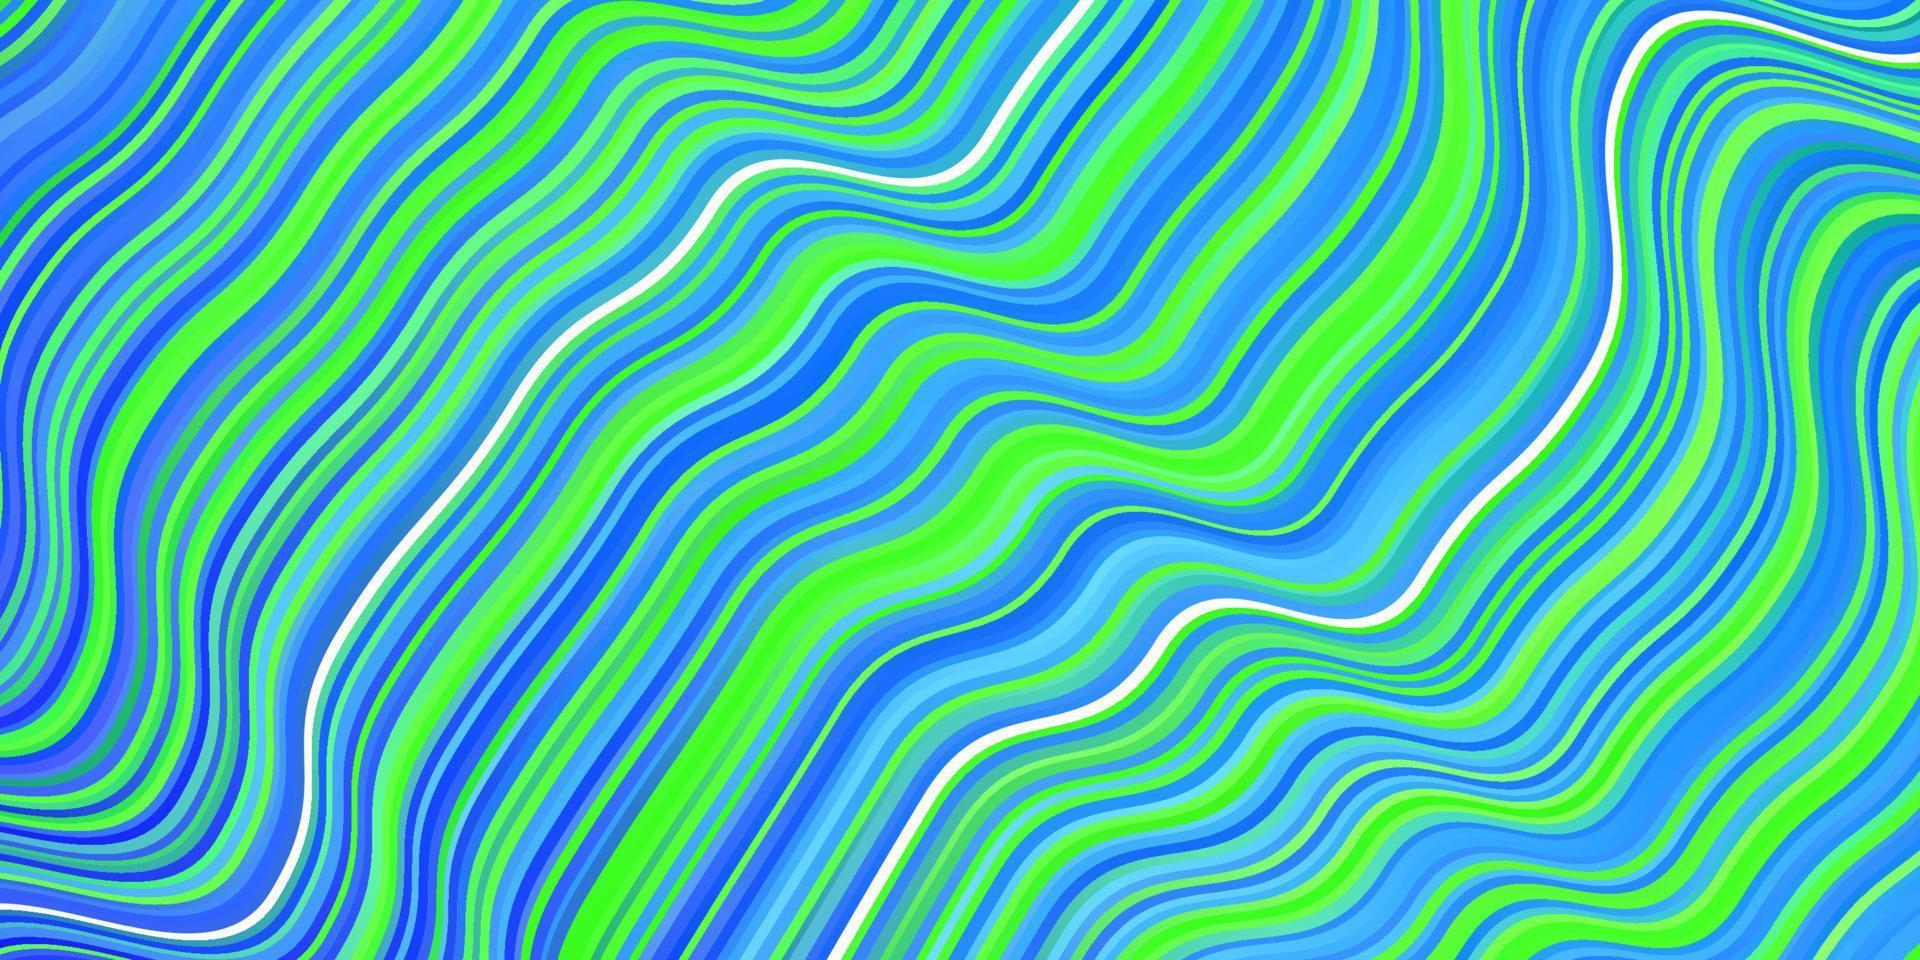 Light Blue, Green vector background with wry lines.